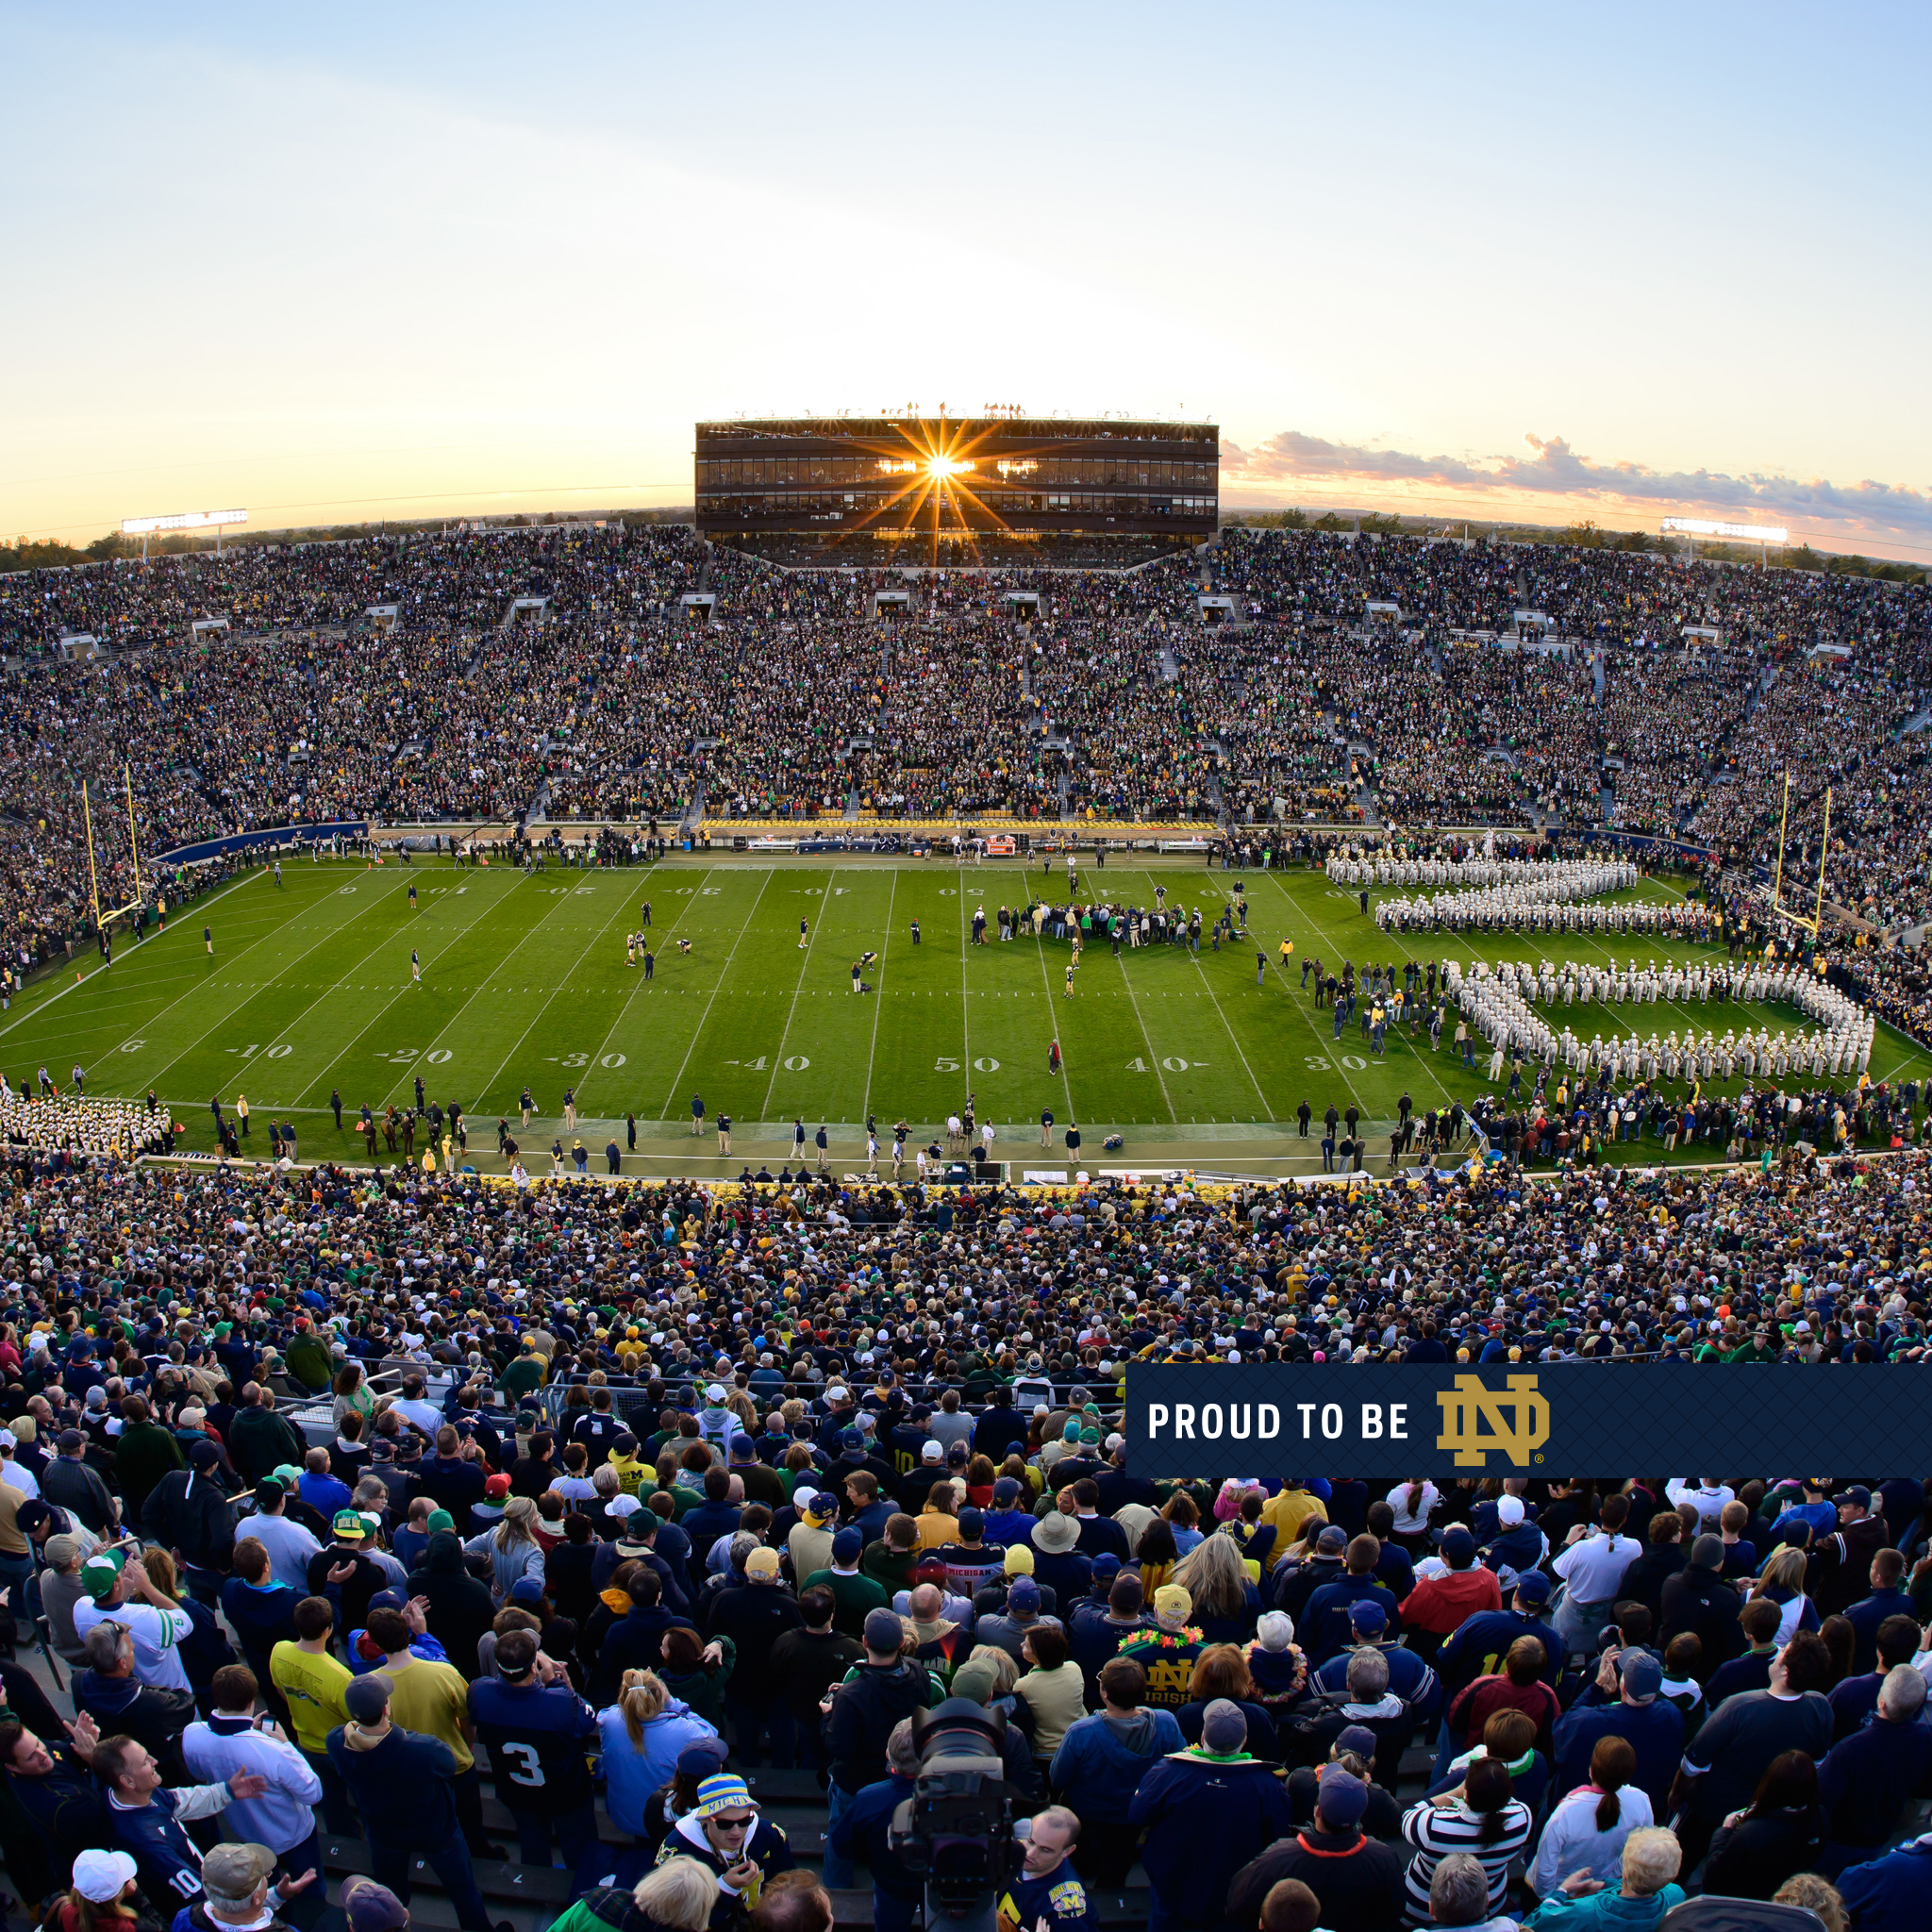 Background Proud To Be Nd University Of Notre Dame